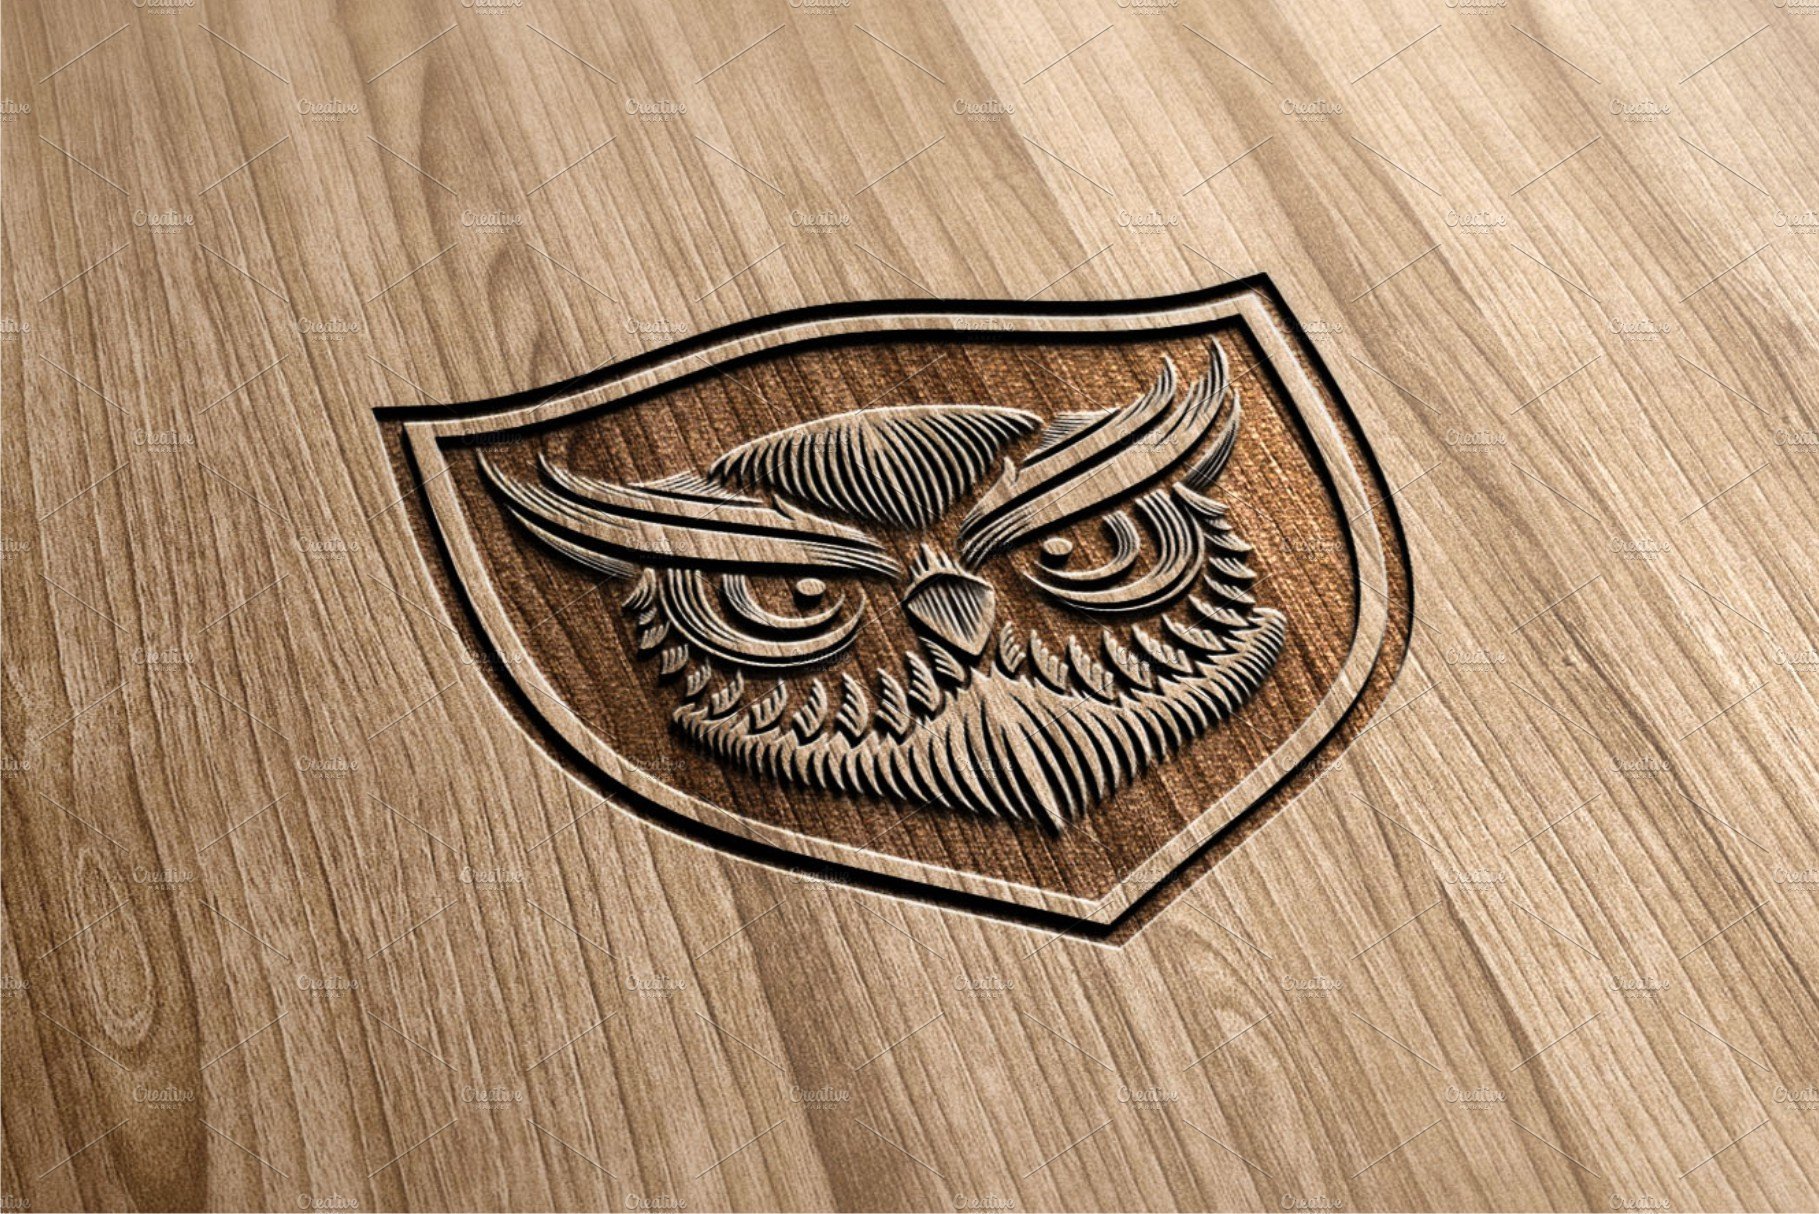 Wise Owl preview image.